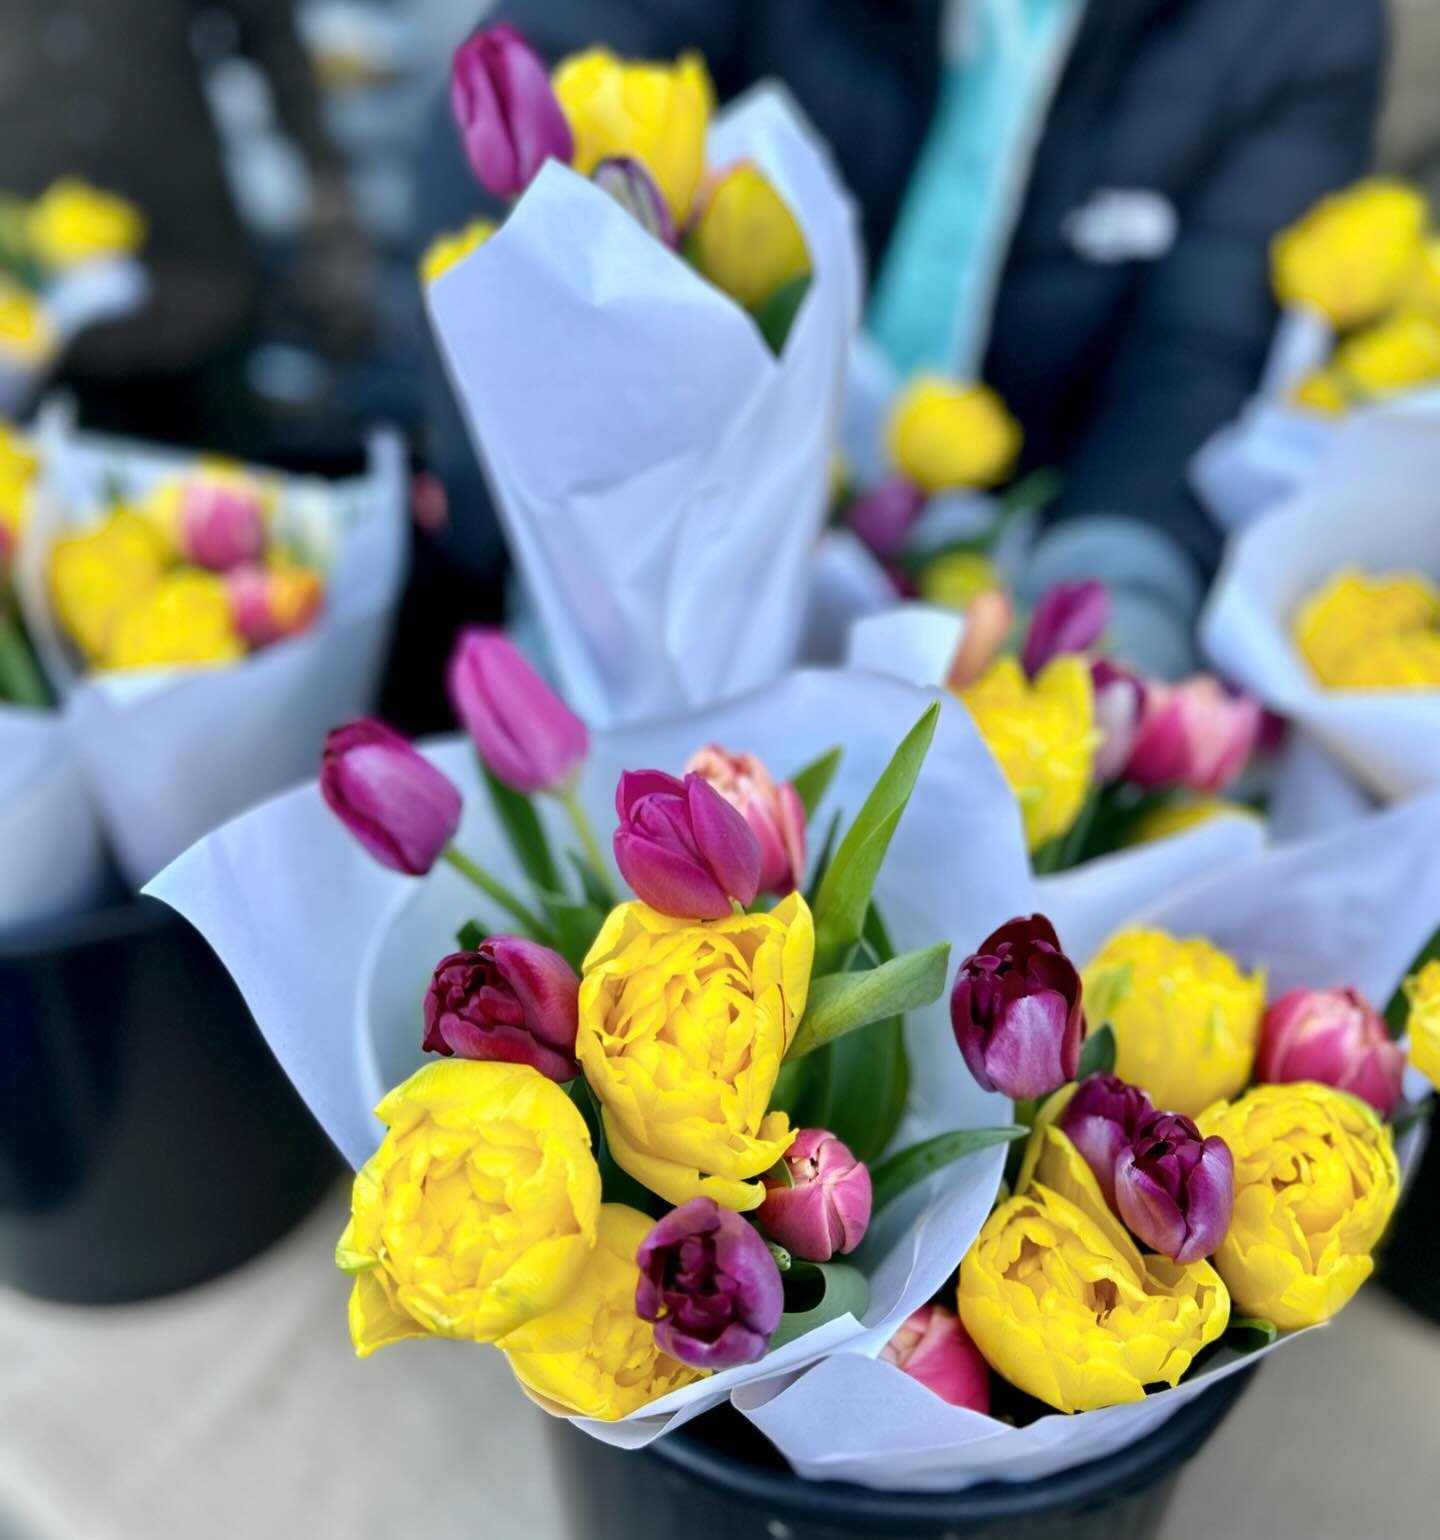 💐Will you be bringing one of these bundles of beauties home with you tomorrow morning? 😍Add it to your basket full of local groceries and one of a kind artisan finds! 🧺

You definitely won&rsquo;t want to miss our second market day of the year! We